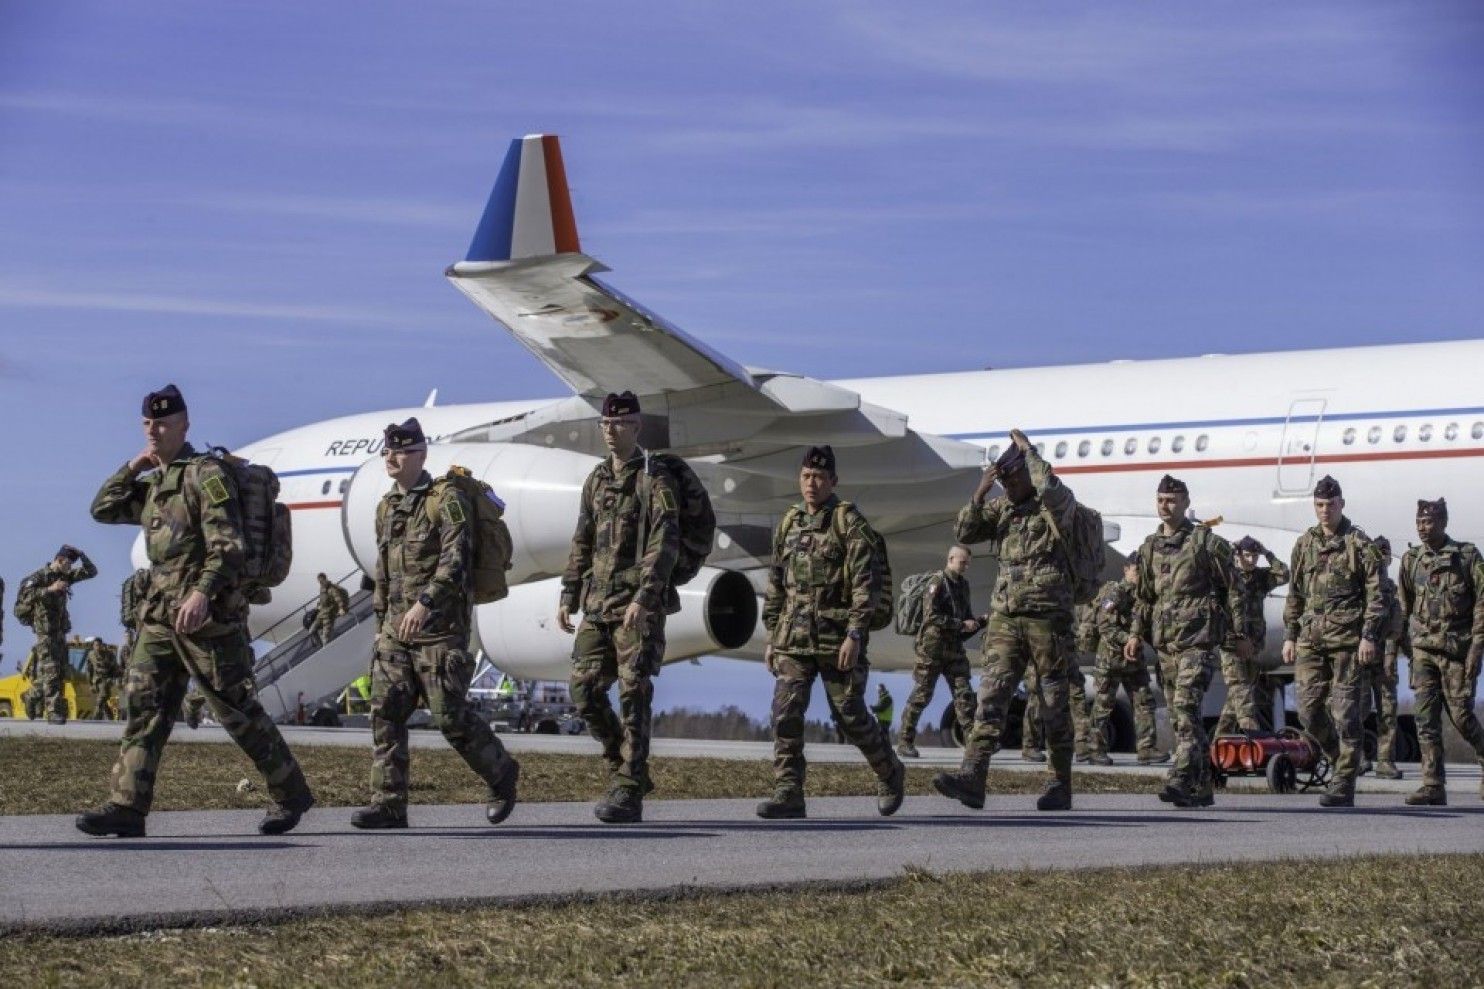 A photo from the Estonian Ministry of Defense information center shows French soldiers landing at Amari Air Base, Estonia, on April 4. The troops are part of an expanded NATO contingent in the Baltic countries. Ardi Halismaa/European Pressphoto Agency.